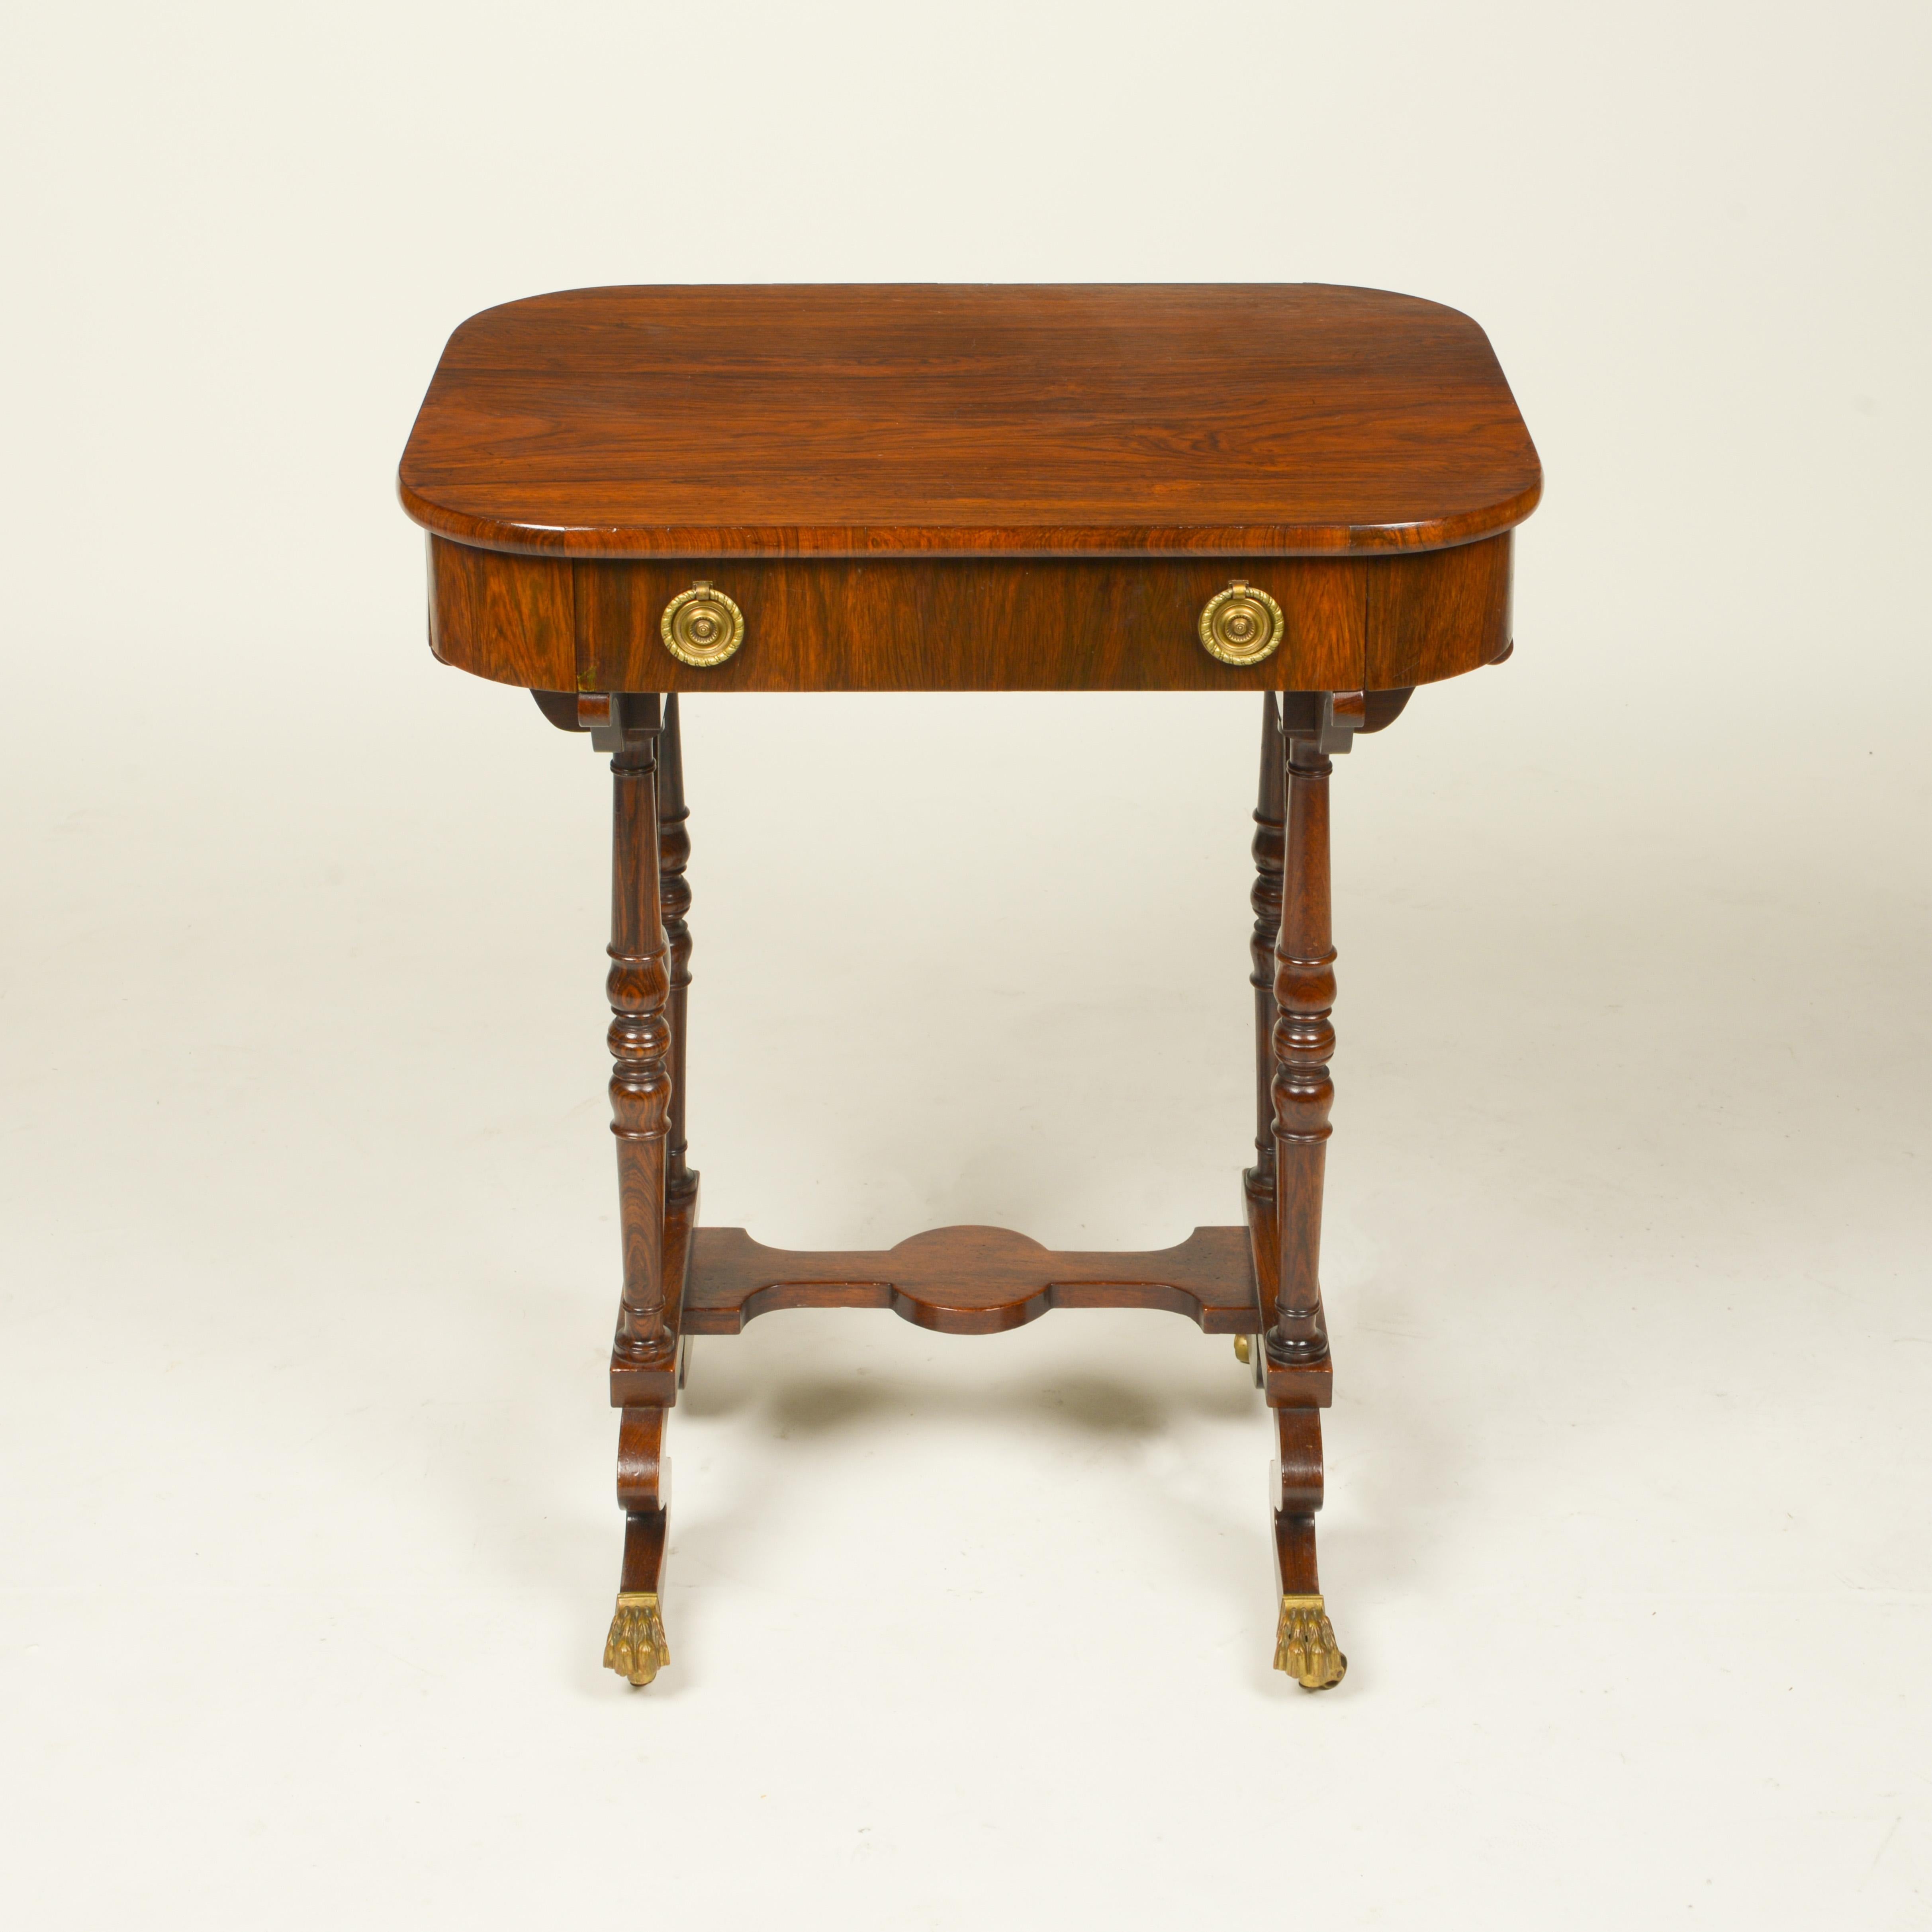 The rectangular top with rounded edges, fitted with a drawer with two brass pulls; the turned legs terminating in brass claw feet are joined by a small stretcher.